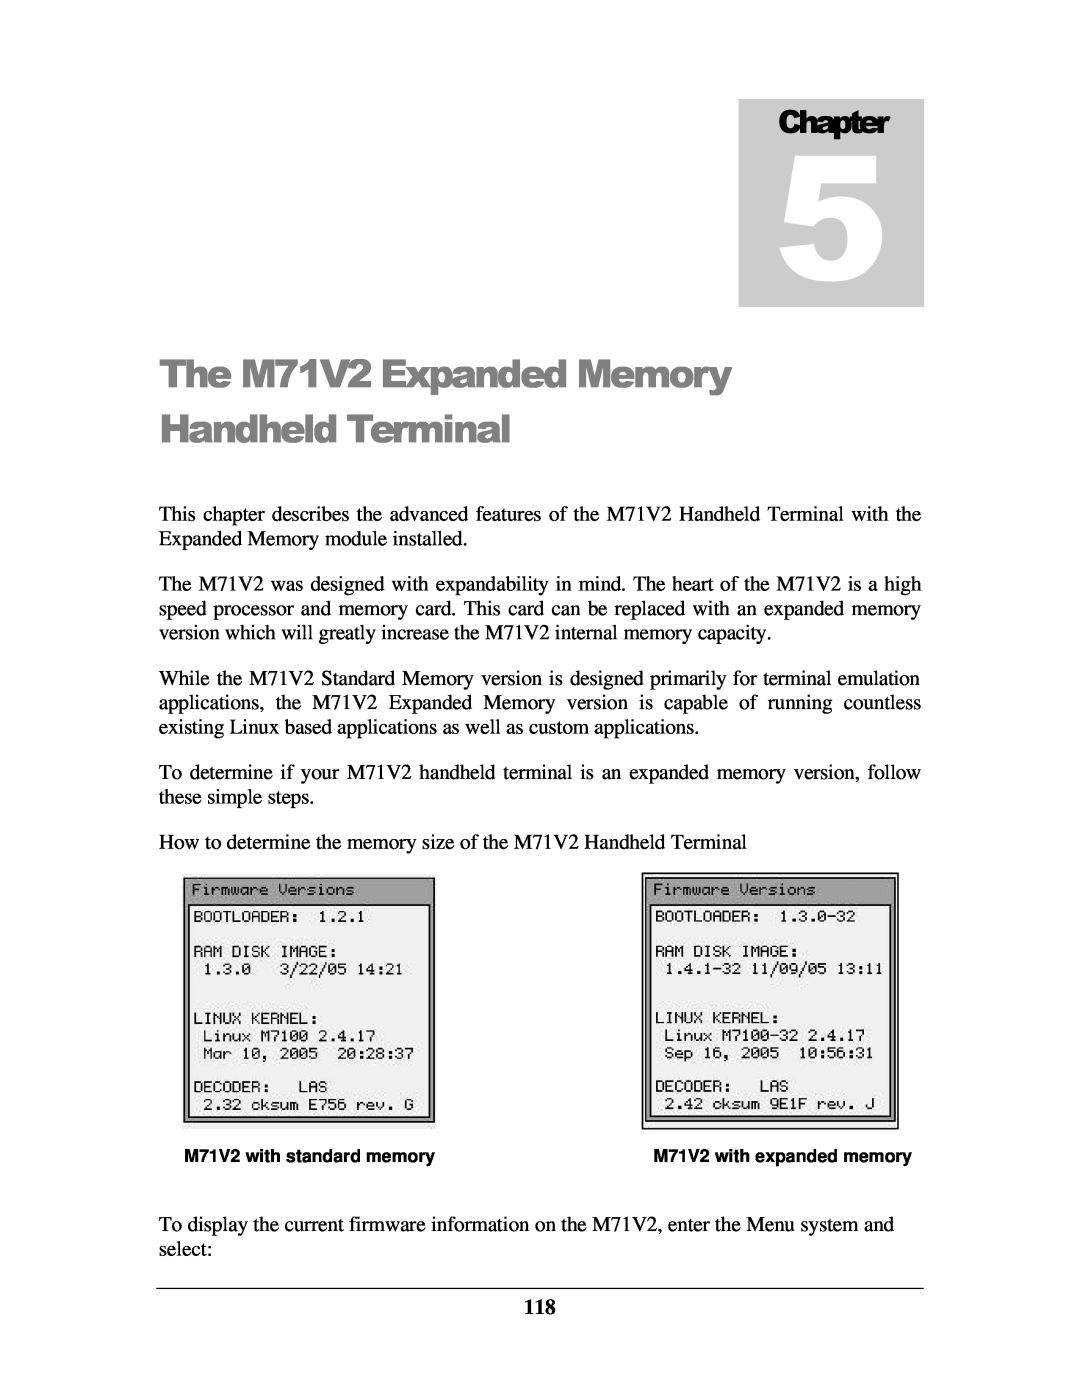 IBM manual The M71V2 Expanded Memory Handheld Terminal, Chapter 